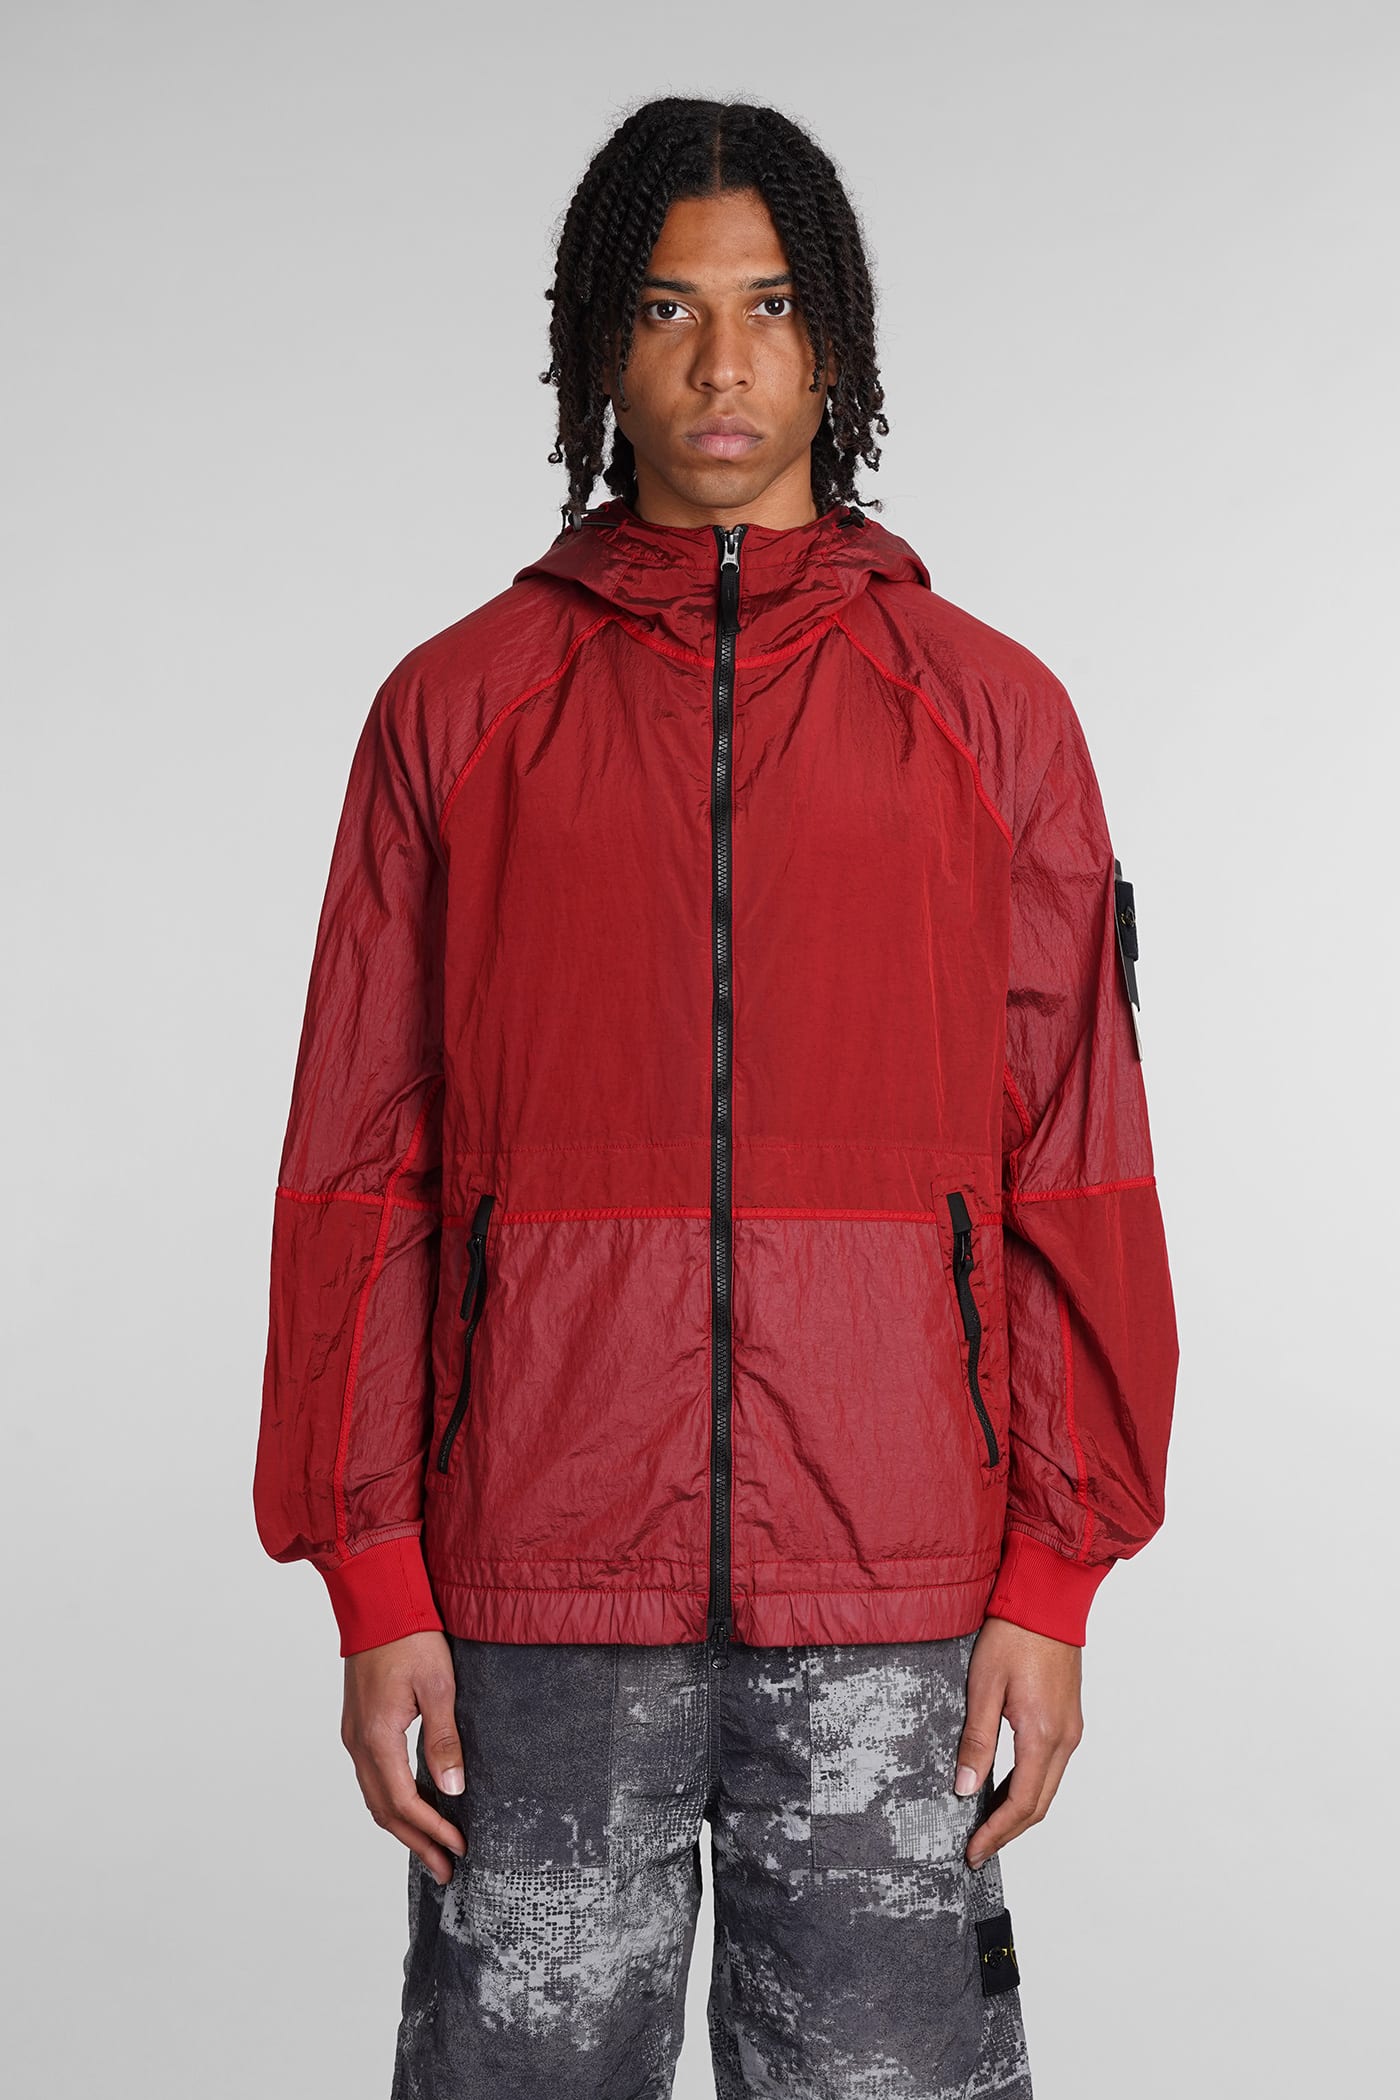 STONE ISLAND CASUAL JACKET IN RED POLYAMIDE